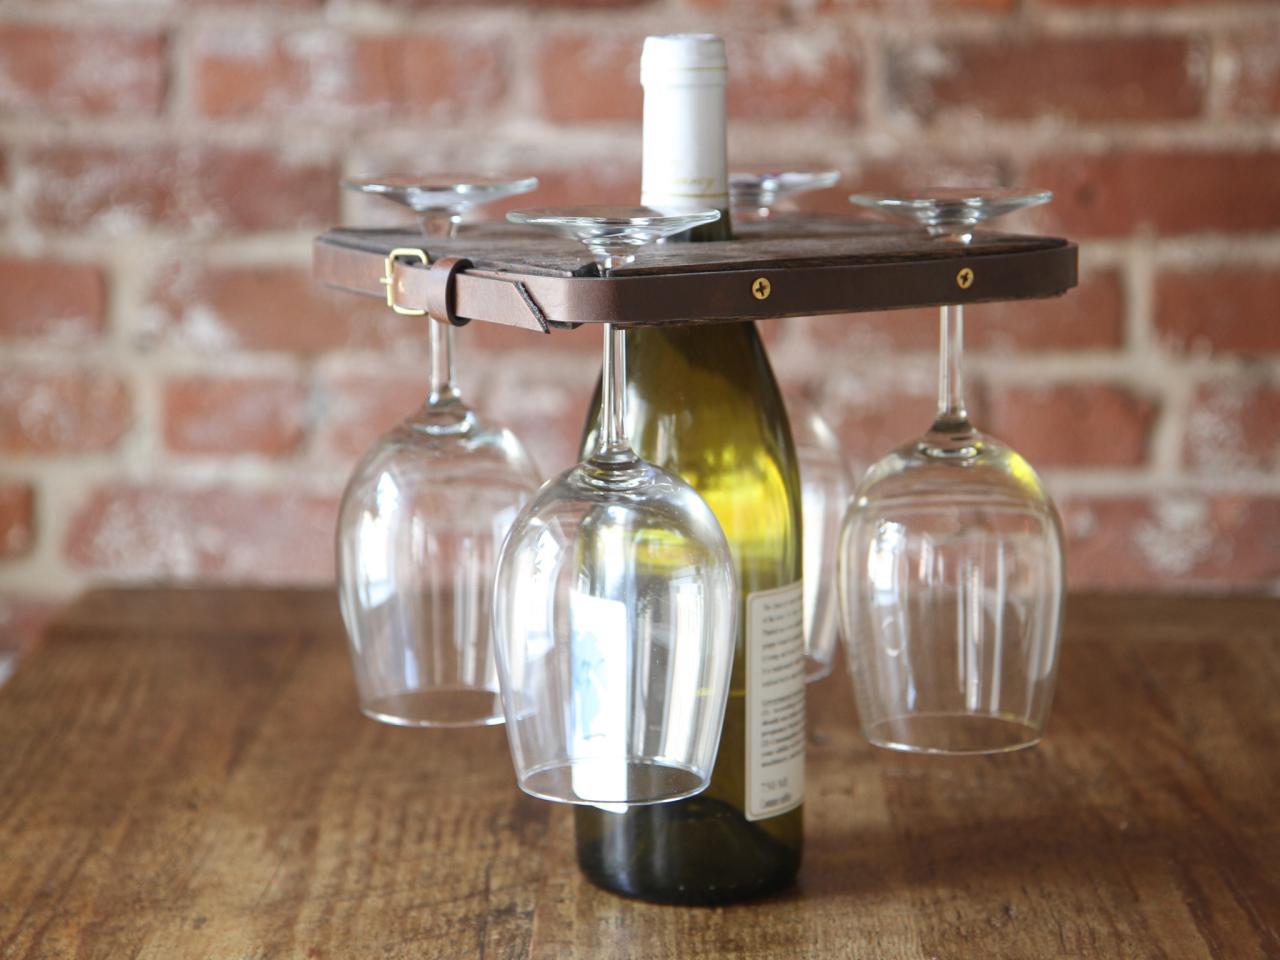 How to Make a DIY Holder for a Wine Bottle and Glasses - Down Home